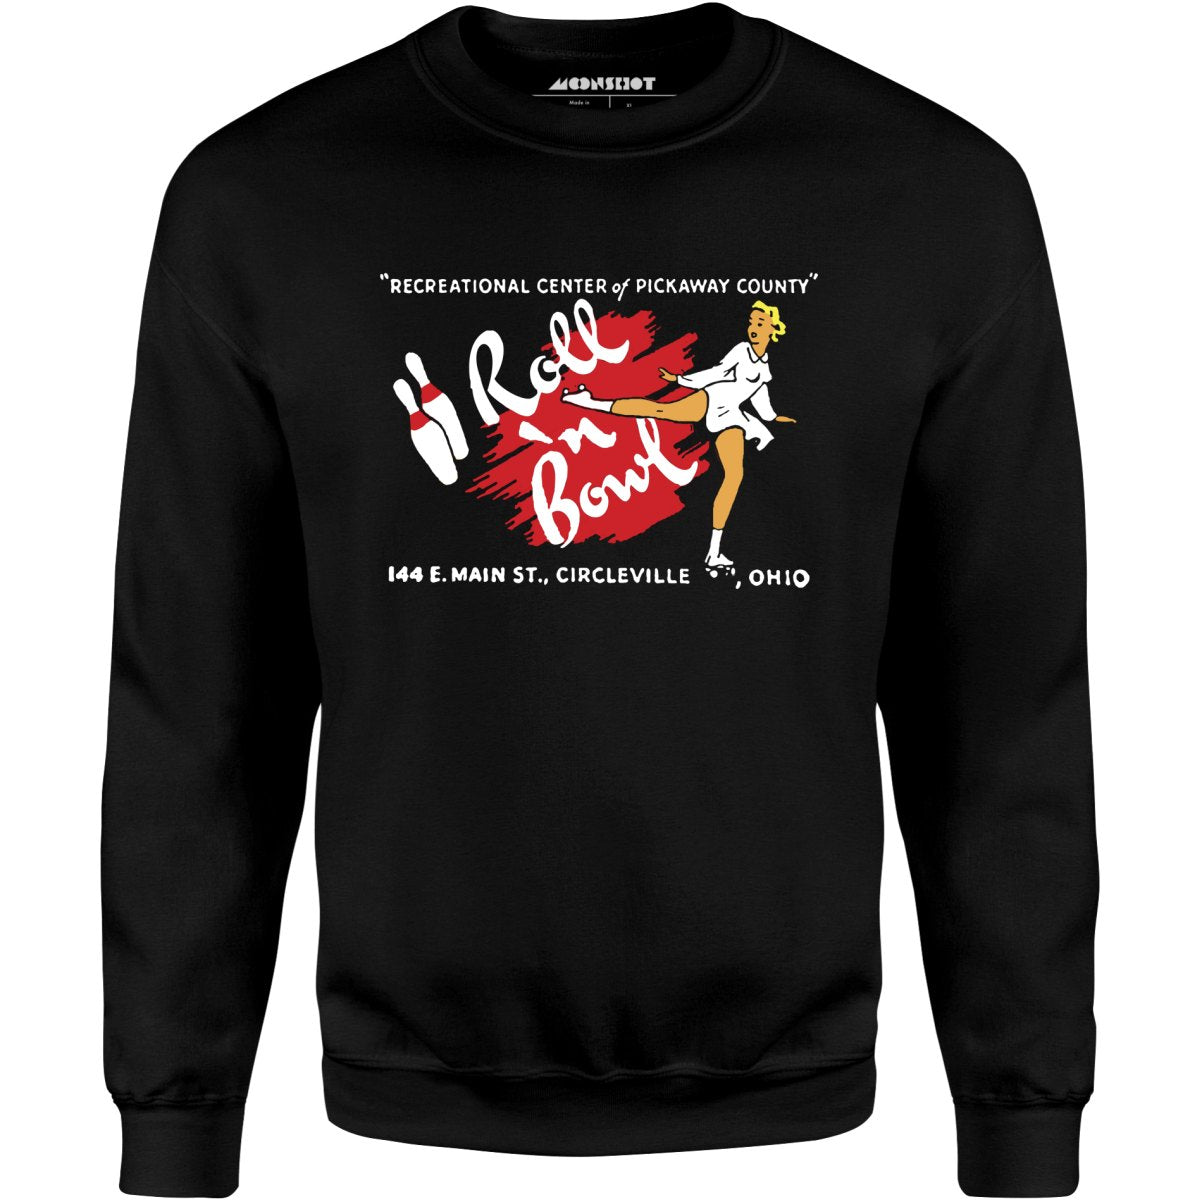 Roll 'n Bowl - Circleville, OH - Vintage Bowling Alley - Unisex Sweatshirt